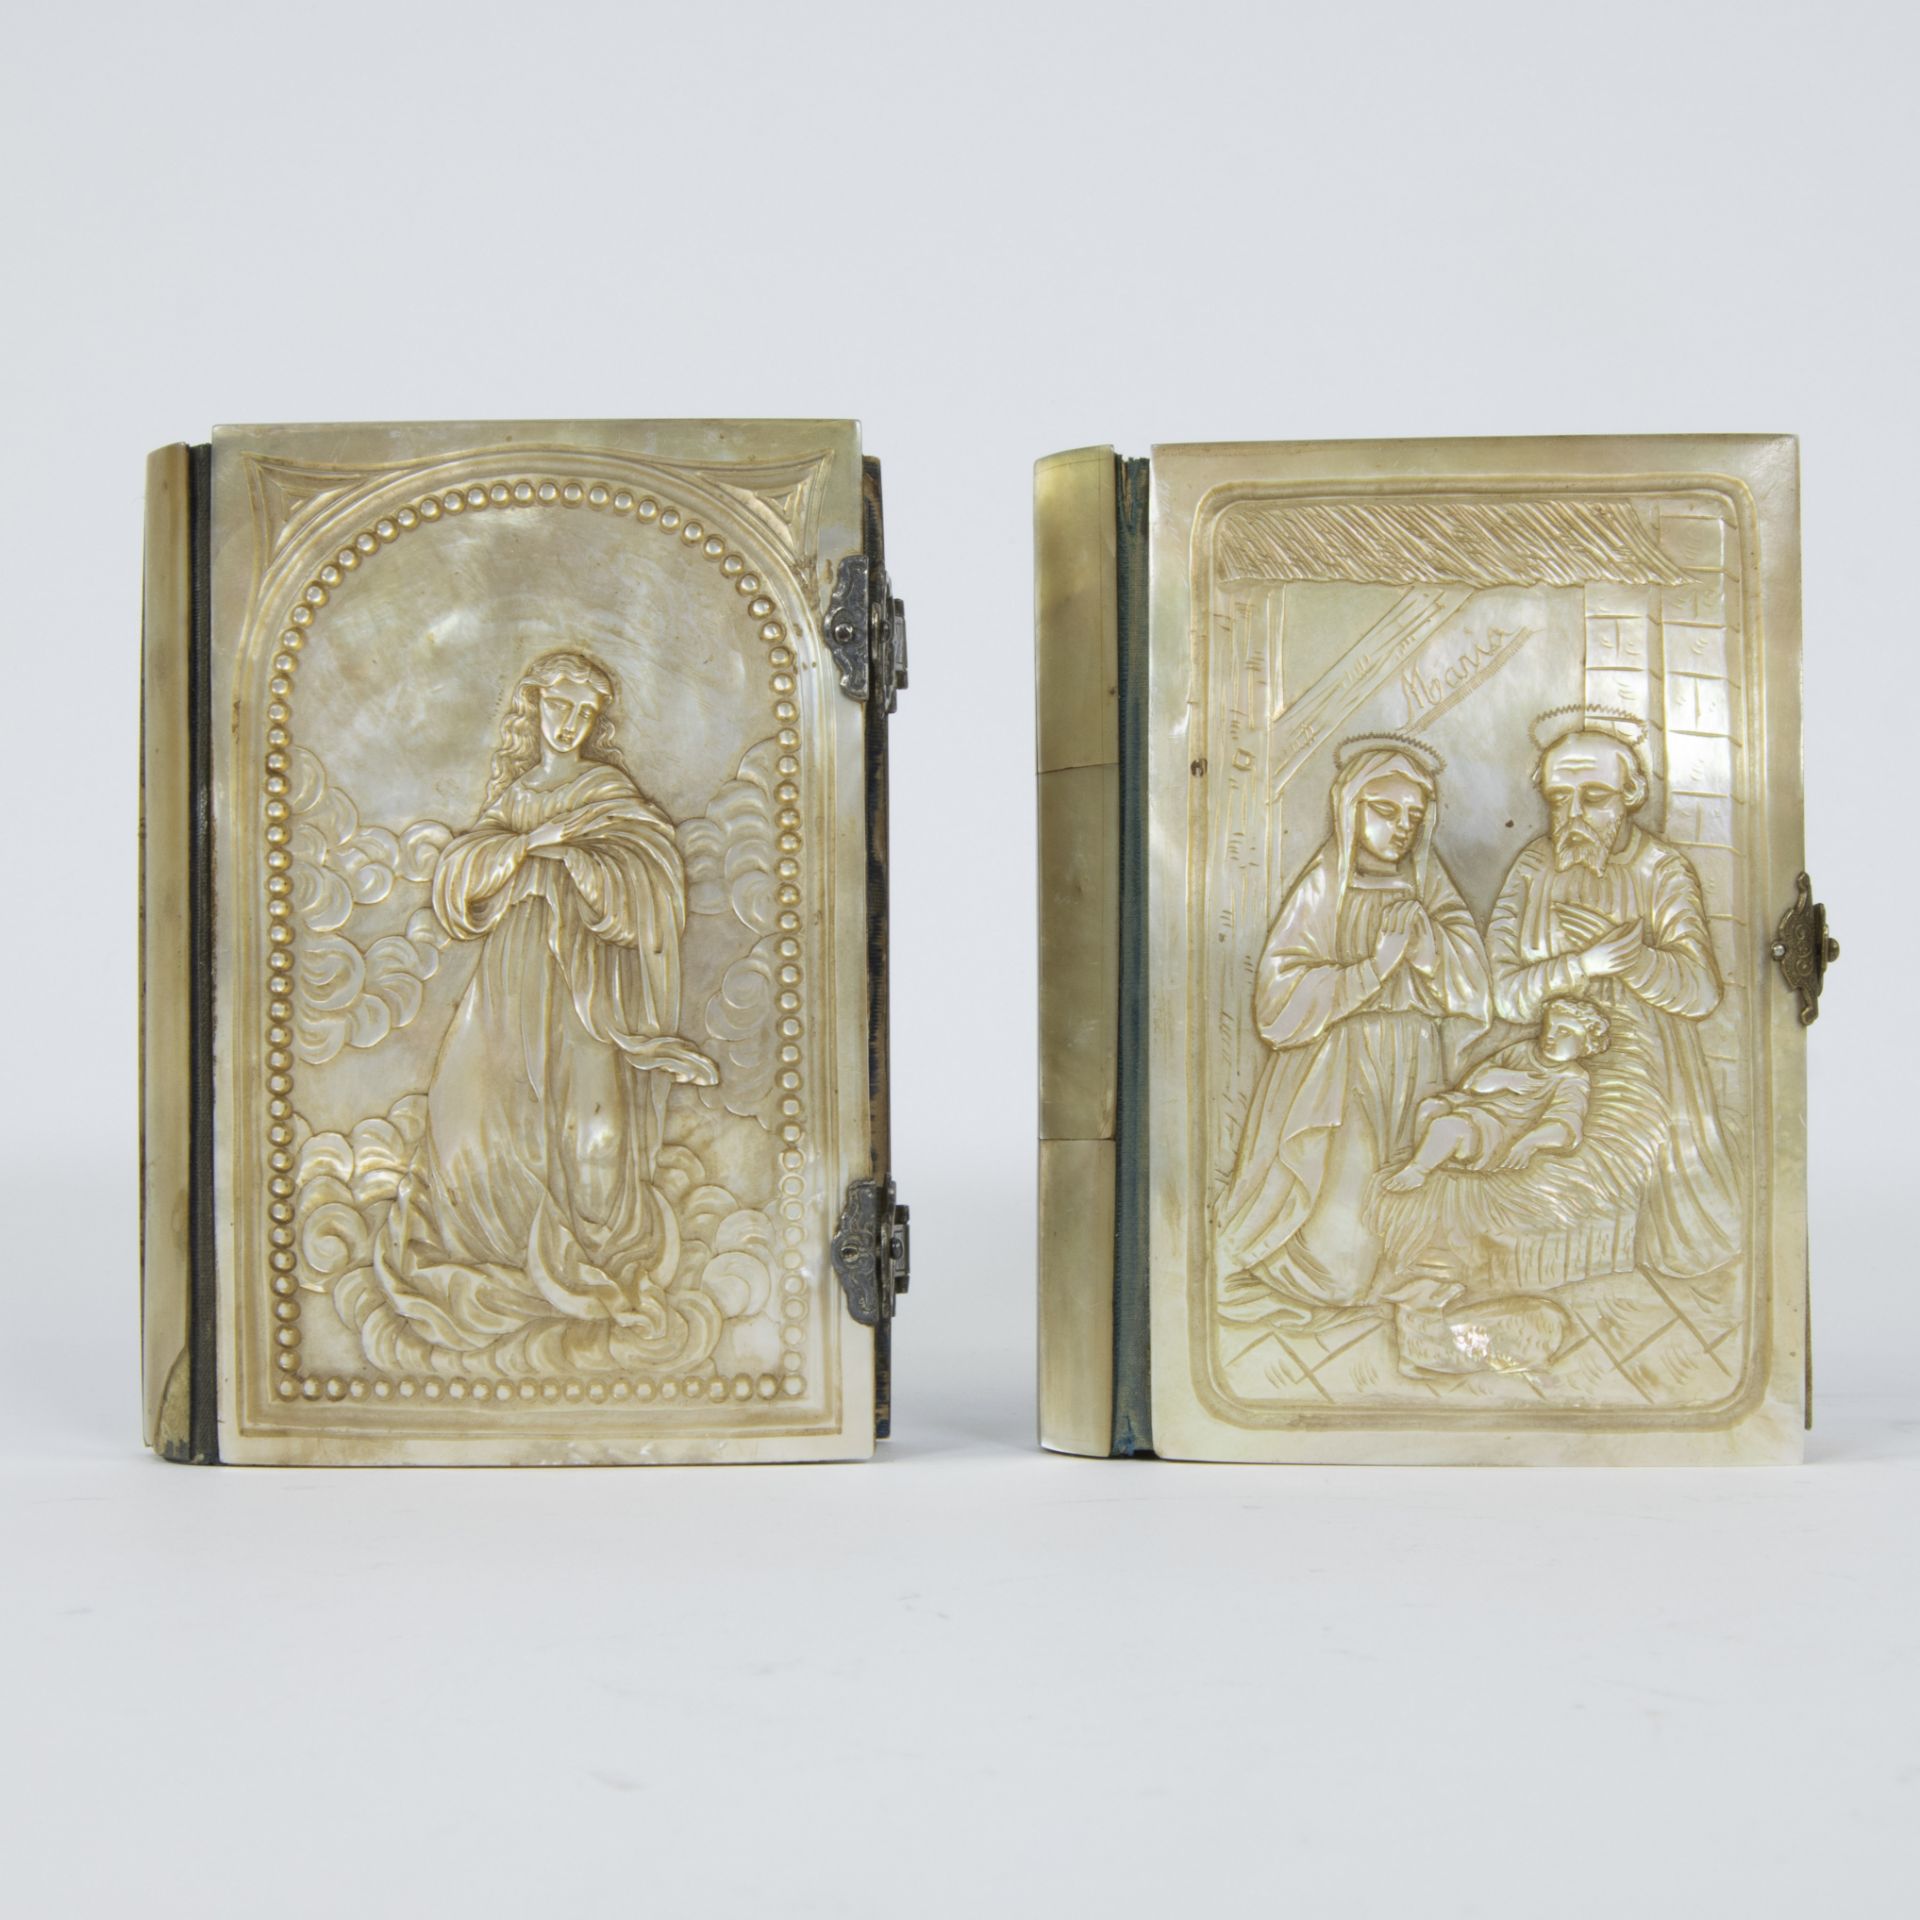 2 booklets with Catholic prayers and meditations, covers in mother-of-pearl, gold on slices